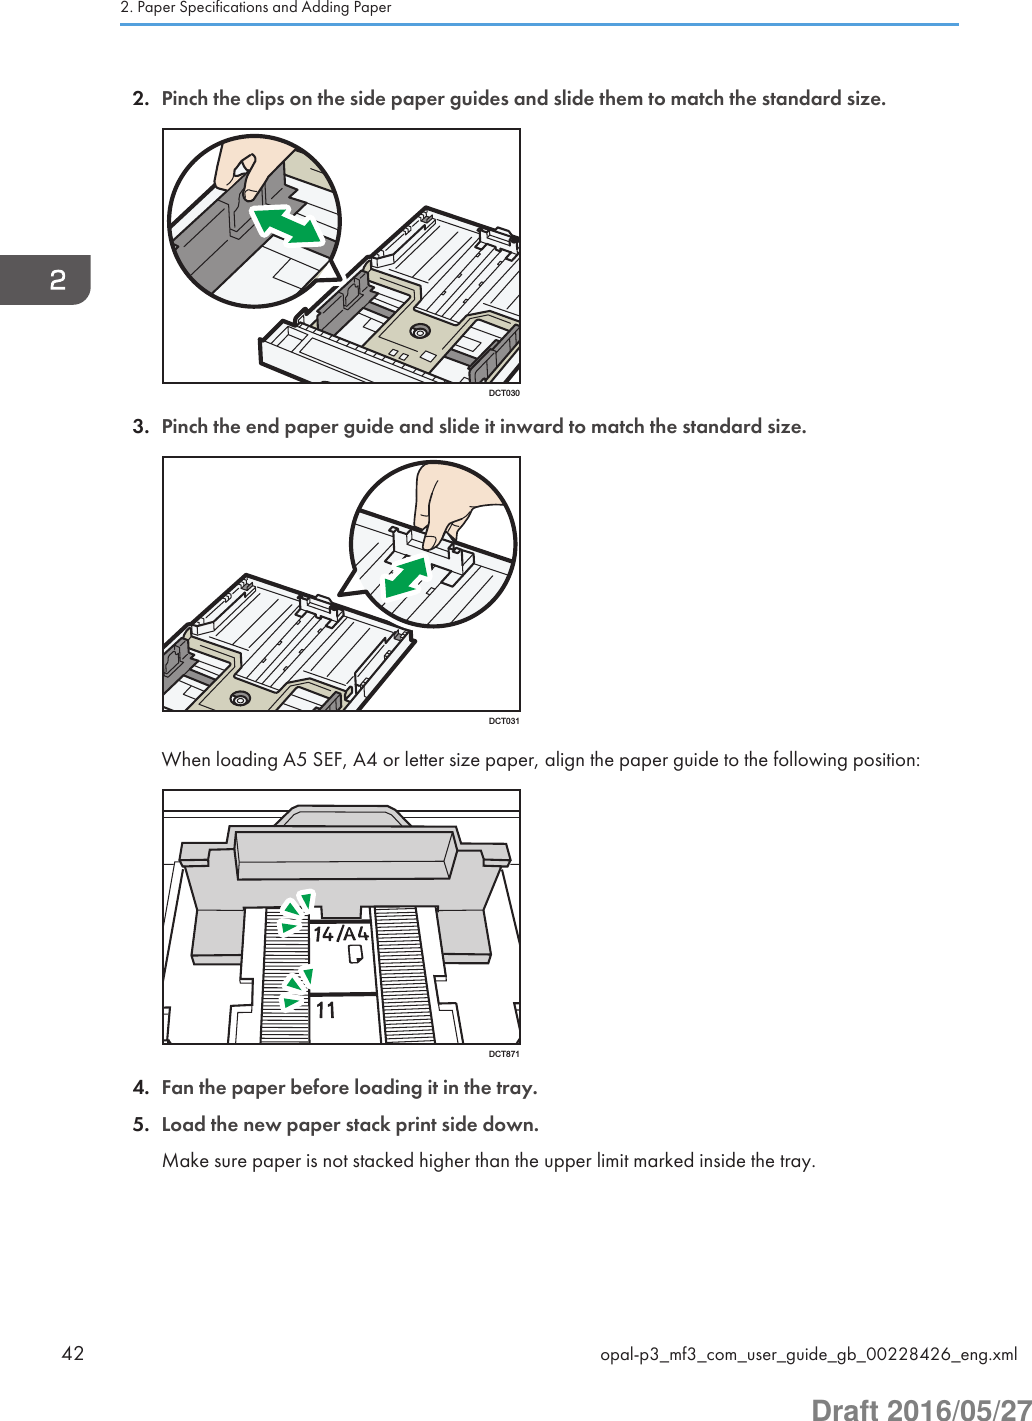 2. Pinch the clips on the side paper guides and slide them to match the standard size.DCT0303. Pinch the end paper guide and slide it inward to match the standard size.DCT031When loading A5 SEF, A4 or letter size paper, align the paper guide to the following position:DCT8714. Fan the paper before loading it in the tray.5. Load the new paper stack print side down.Make sure paper is not stacked higher than the upper limit marked inside the tray.2. Paper Specifications and Adding Paper42 opal-p3_mf3_com_user_guide_gb_00228426_eng.xmlDraft 2016/05/27